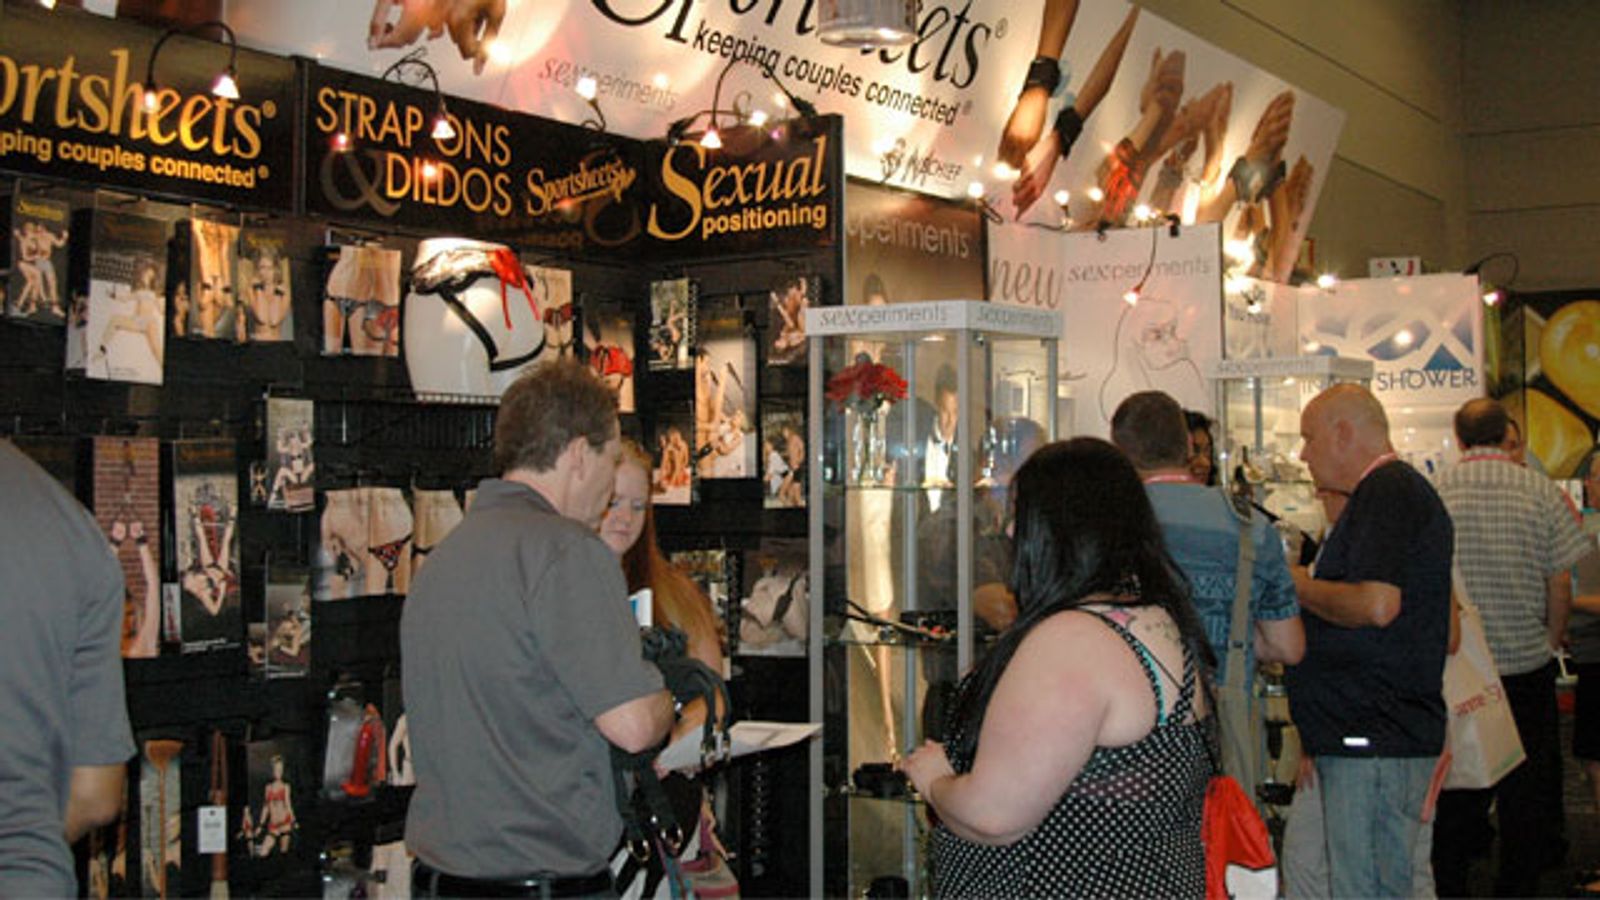 Sportsheets International Reports Satisfaction With Latest Trade Show